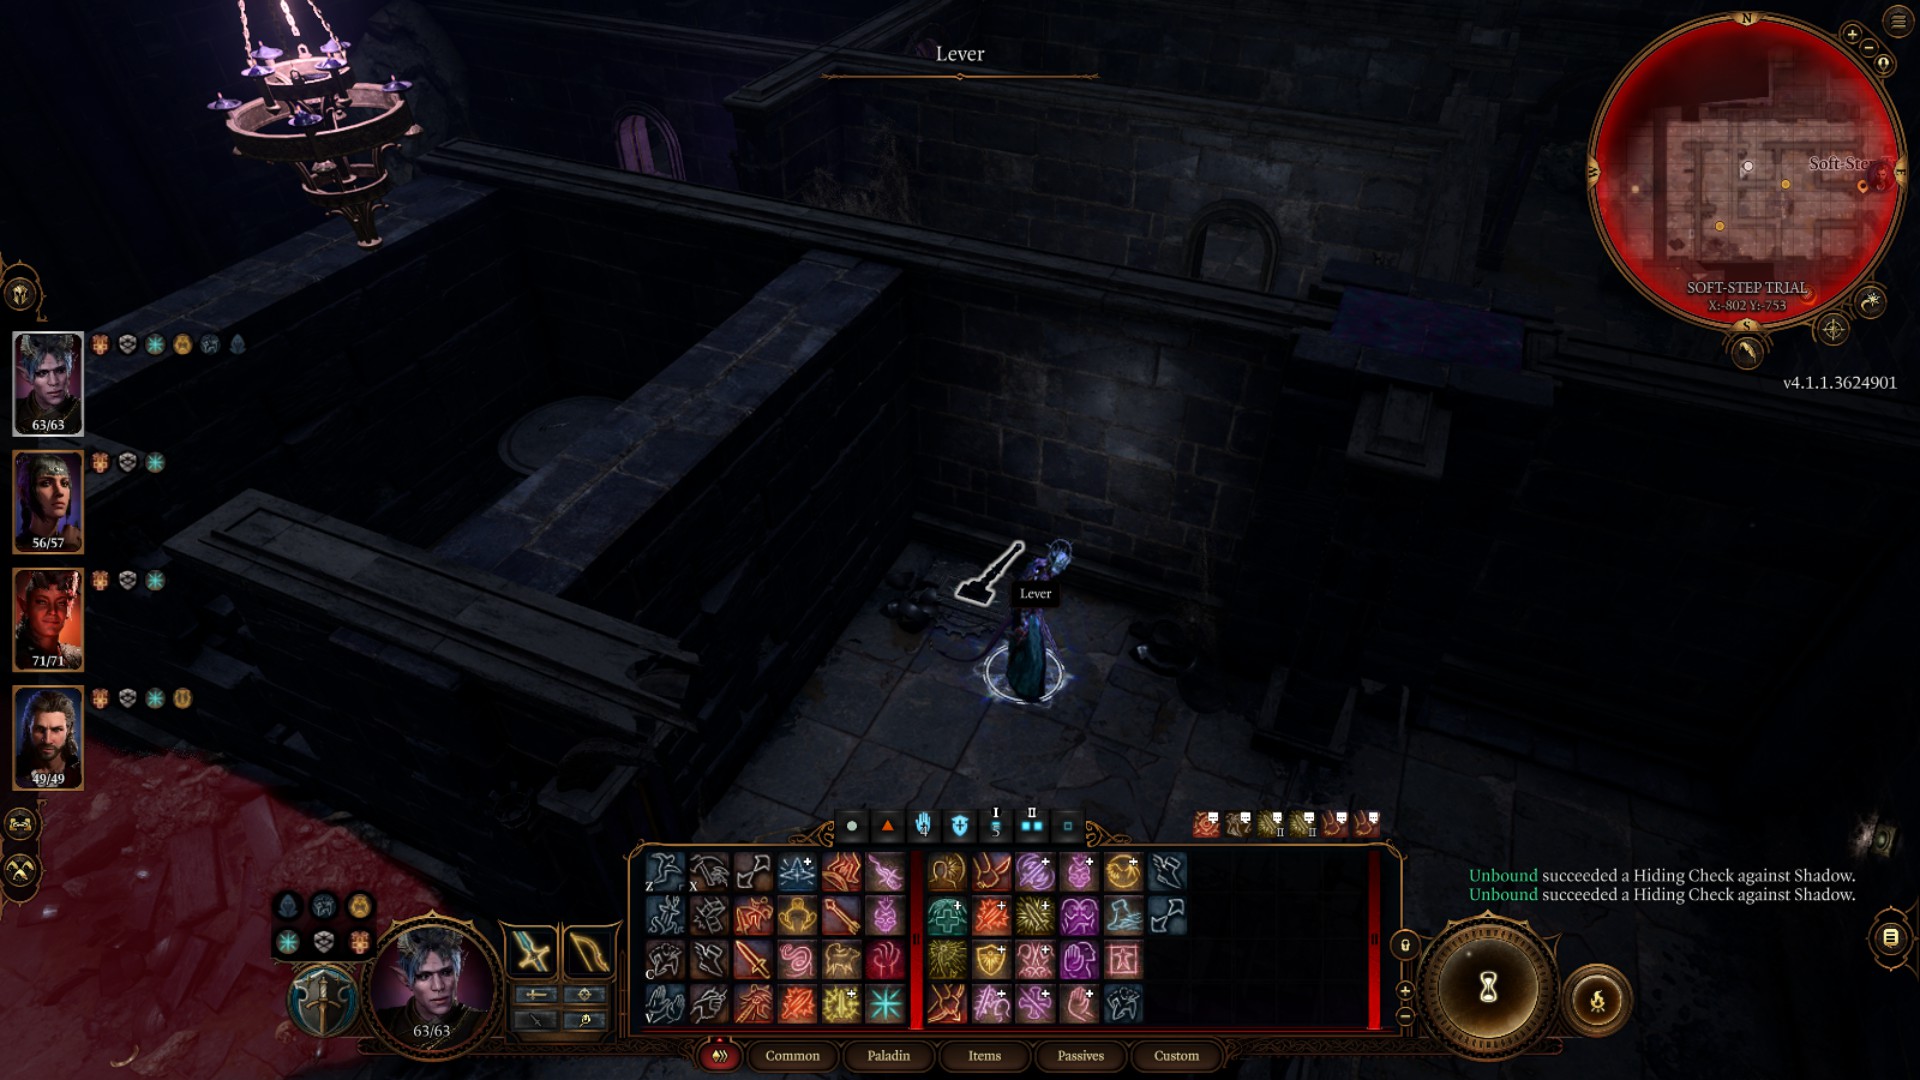 An image showing the location of a lever in the Soft-Step trial of Baldur's Gate 3.